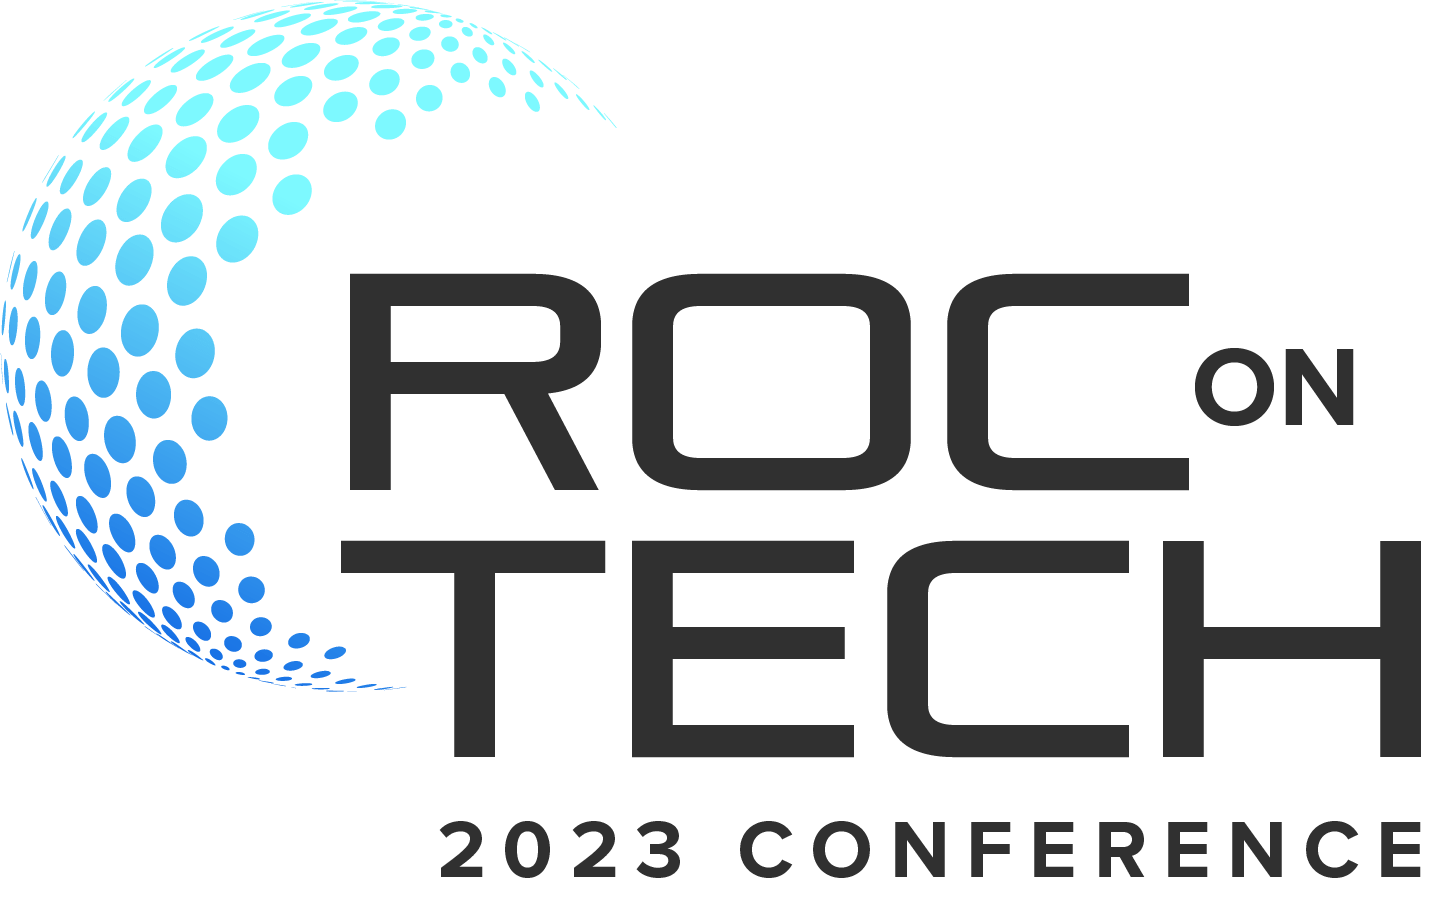 ROC on Tech 2023 Conference